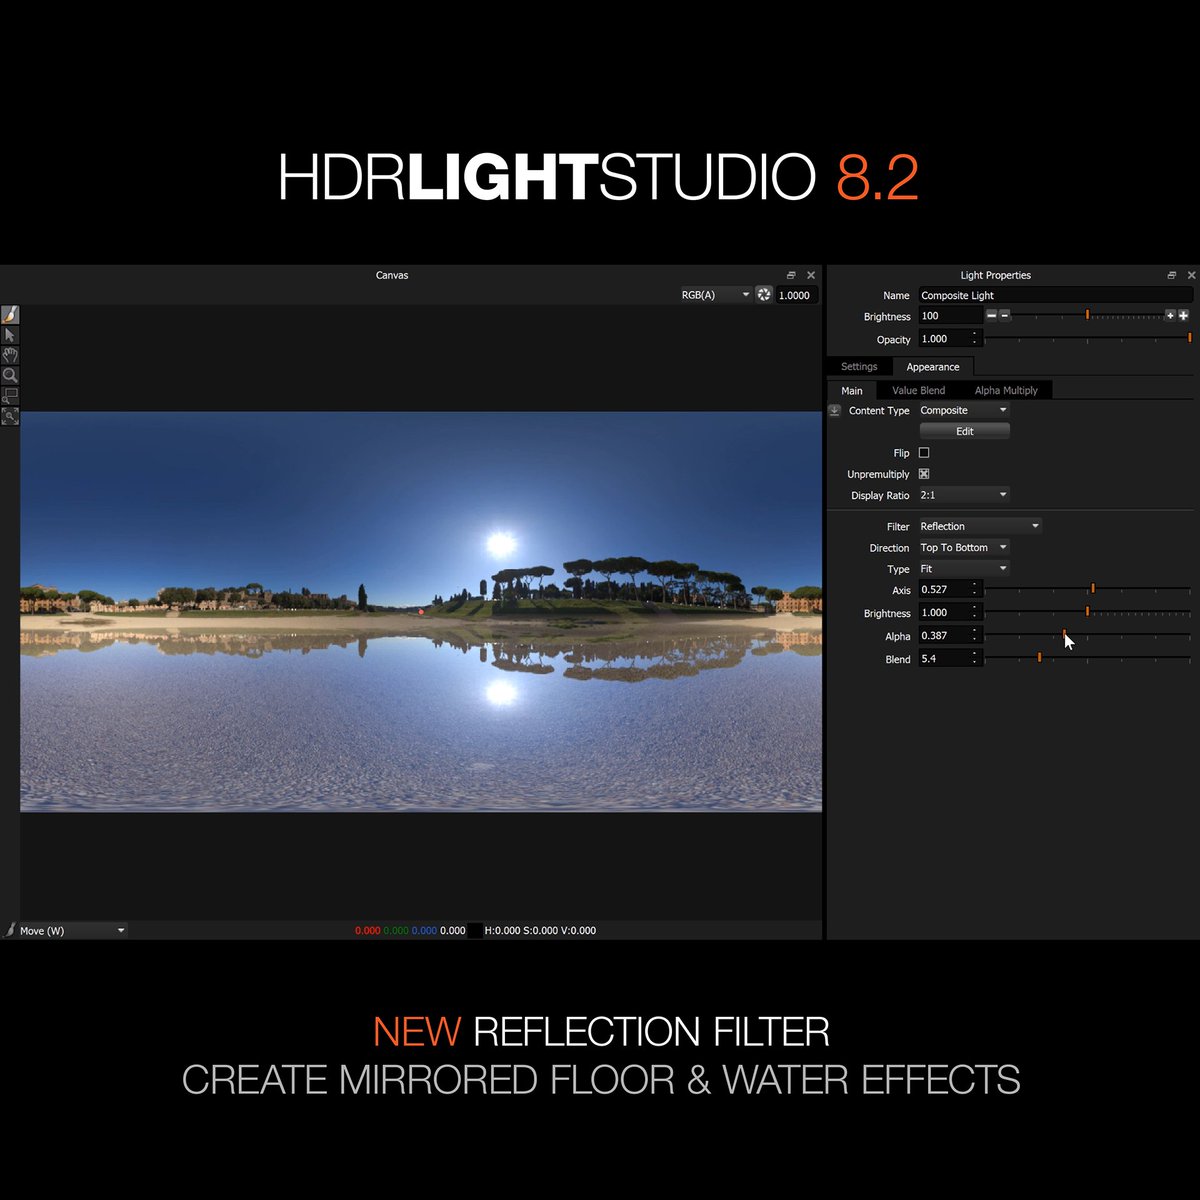 Did you know? The new Reflection Filter in HDR Light Studio 8.2 is perfect for effortlessly crafting stunning mirrored floor and reflective water effects. Find out more: lightmap.co.uk #hdrimap #3d #hdri #cinema4d #c4d #3dsmax #maya #blender3d #modo #unrealengine #cgi